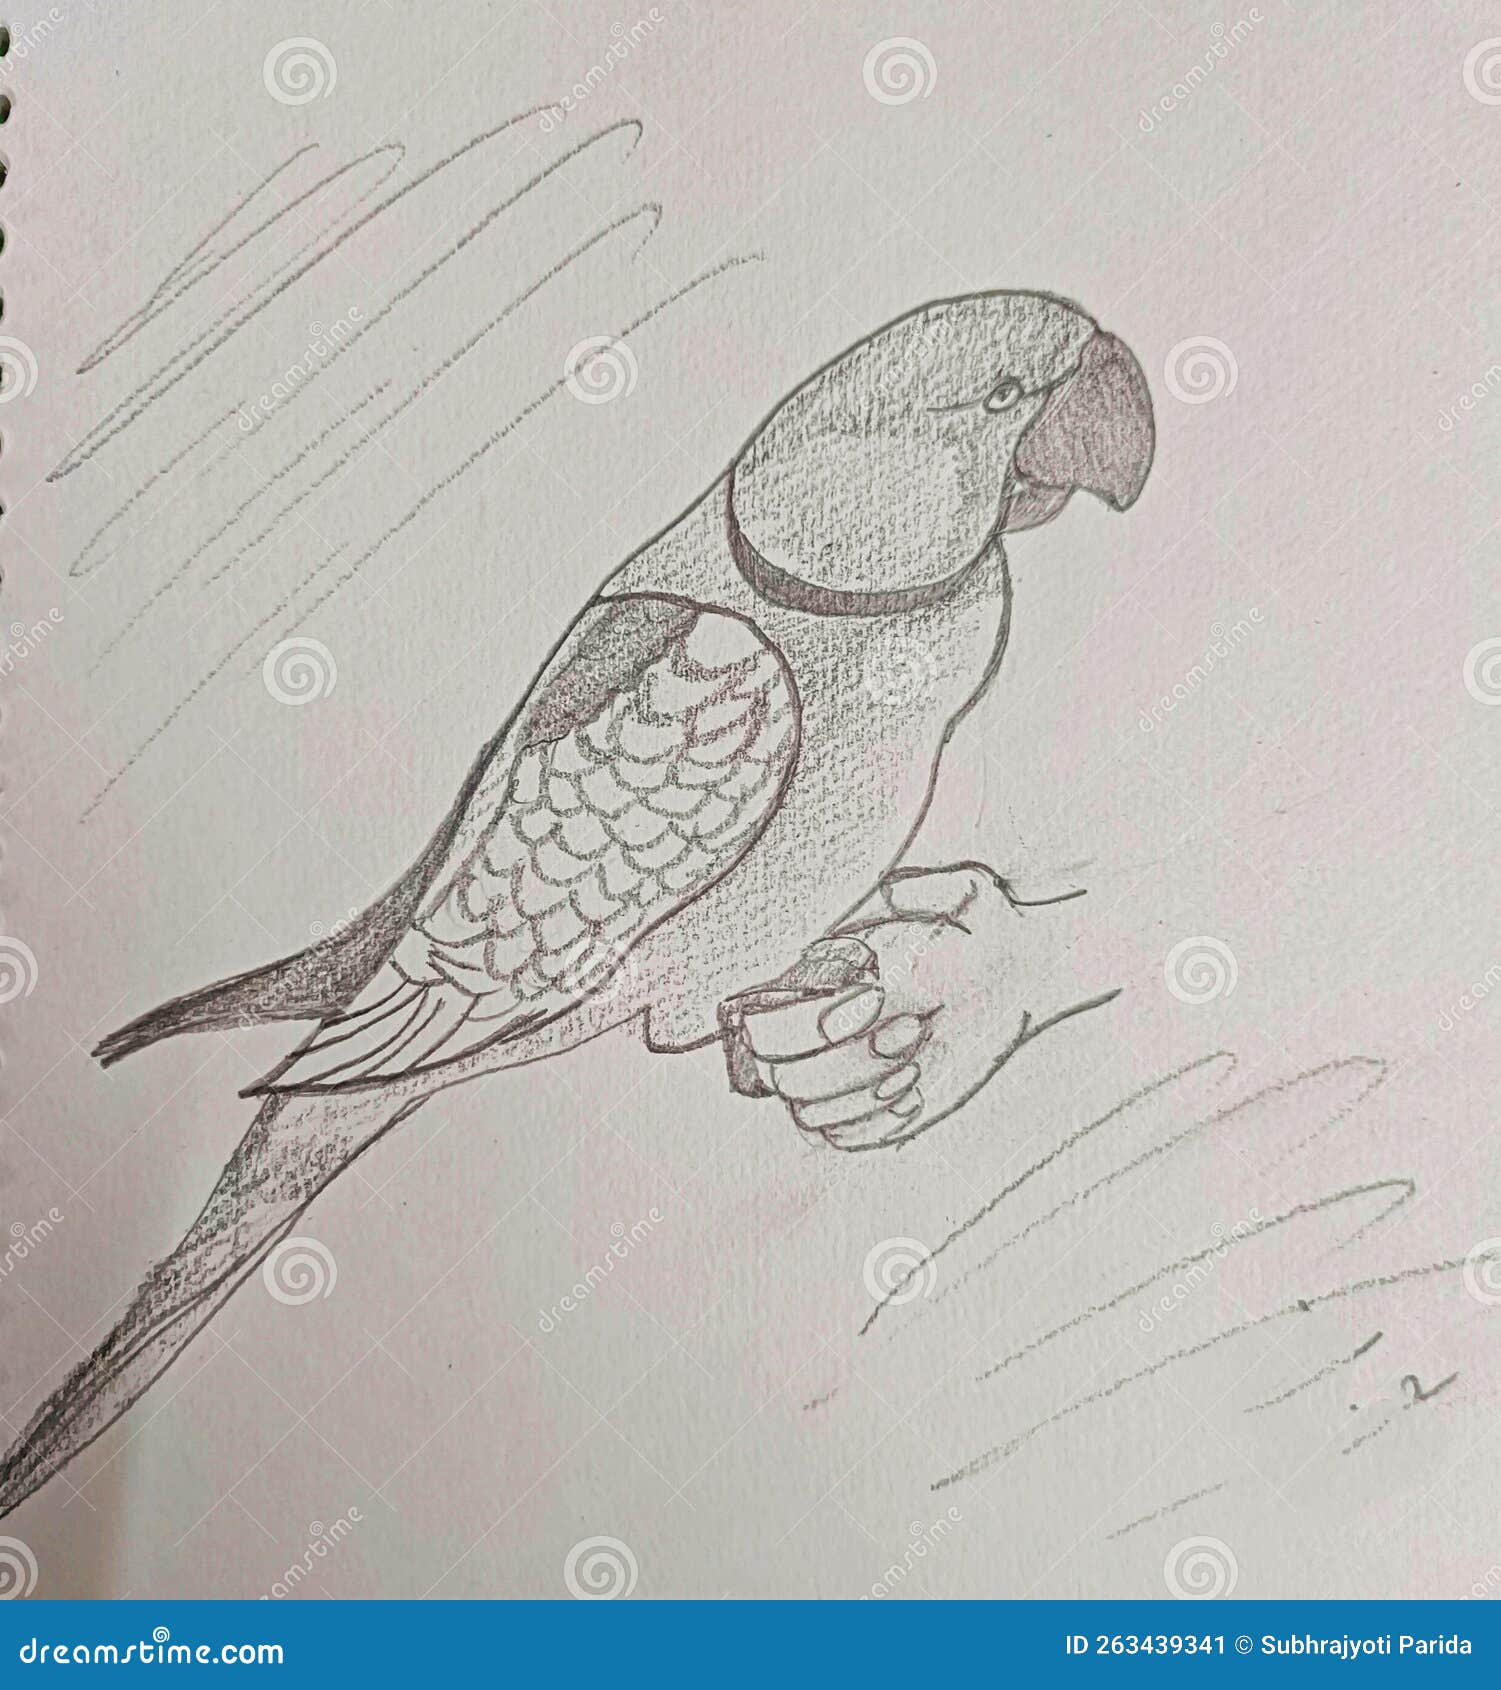 Learn How to Draw a Princess Parrot Parrots Step by Step  Drawing  Tutorials